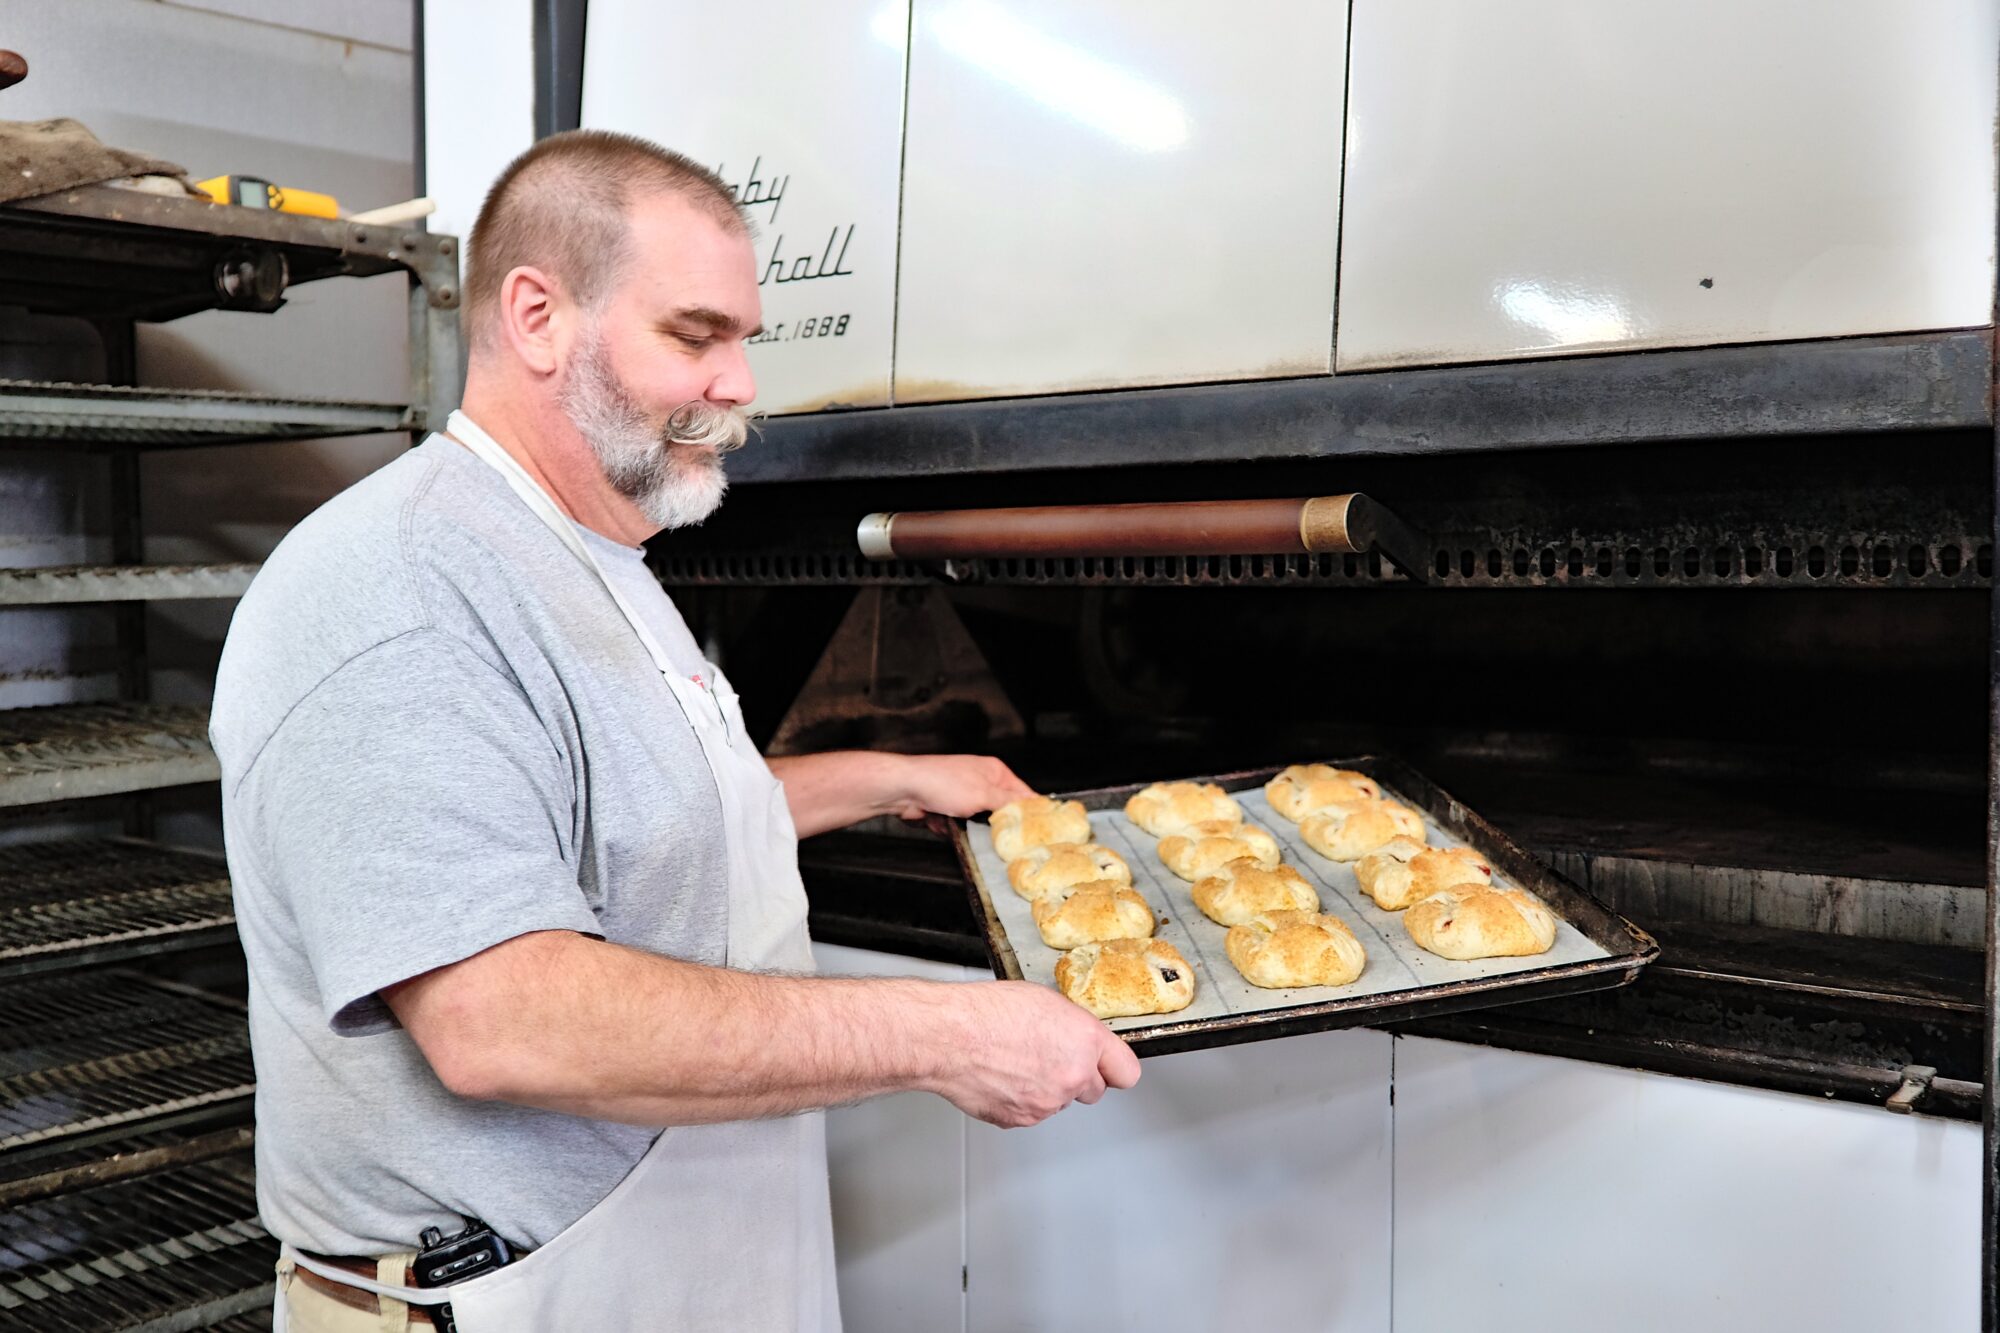 Shawn Oke, owner of Albemarle Sweet Shop, pulls a tray of baked goods from the oven